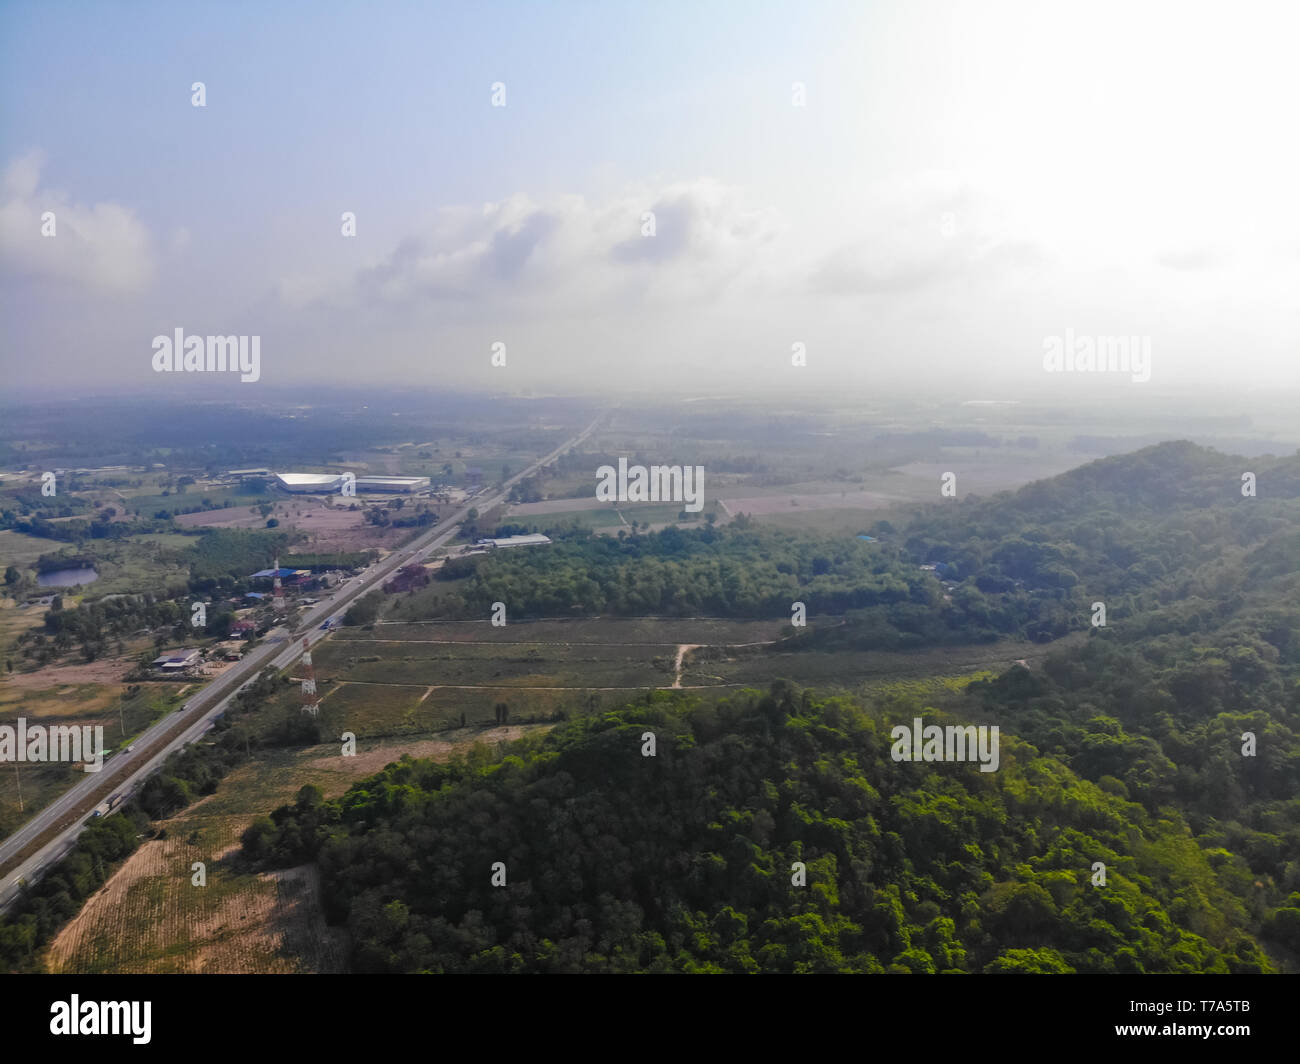 Aerial View Flying Over The Mountains And Trees With Beautiful Clouds And Sky In Sunrise Landscape Nature With Aerial Camera Shot Thailand Stock Photo Alamy